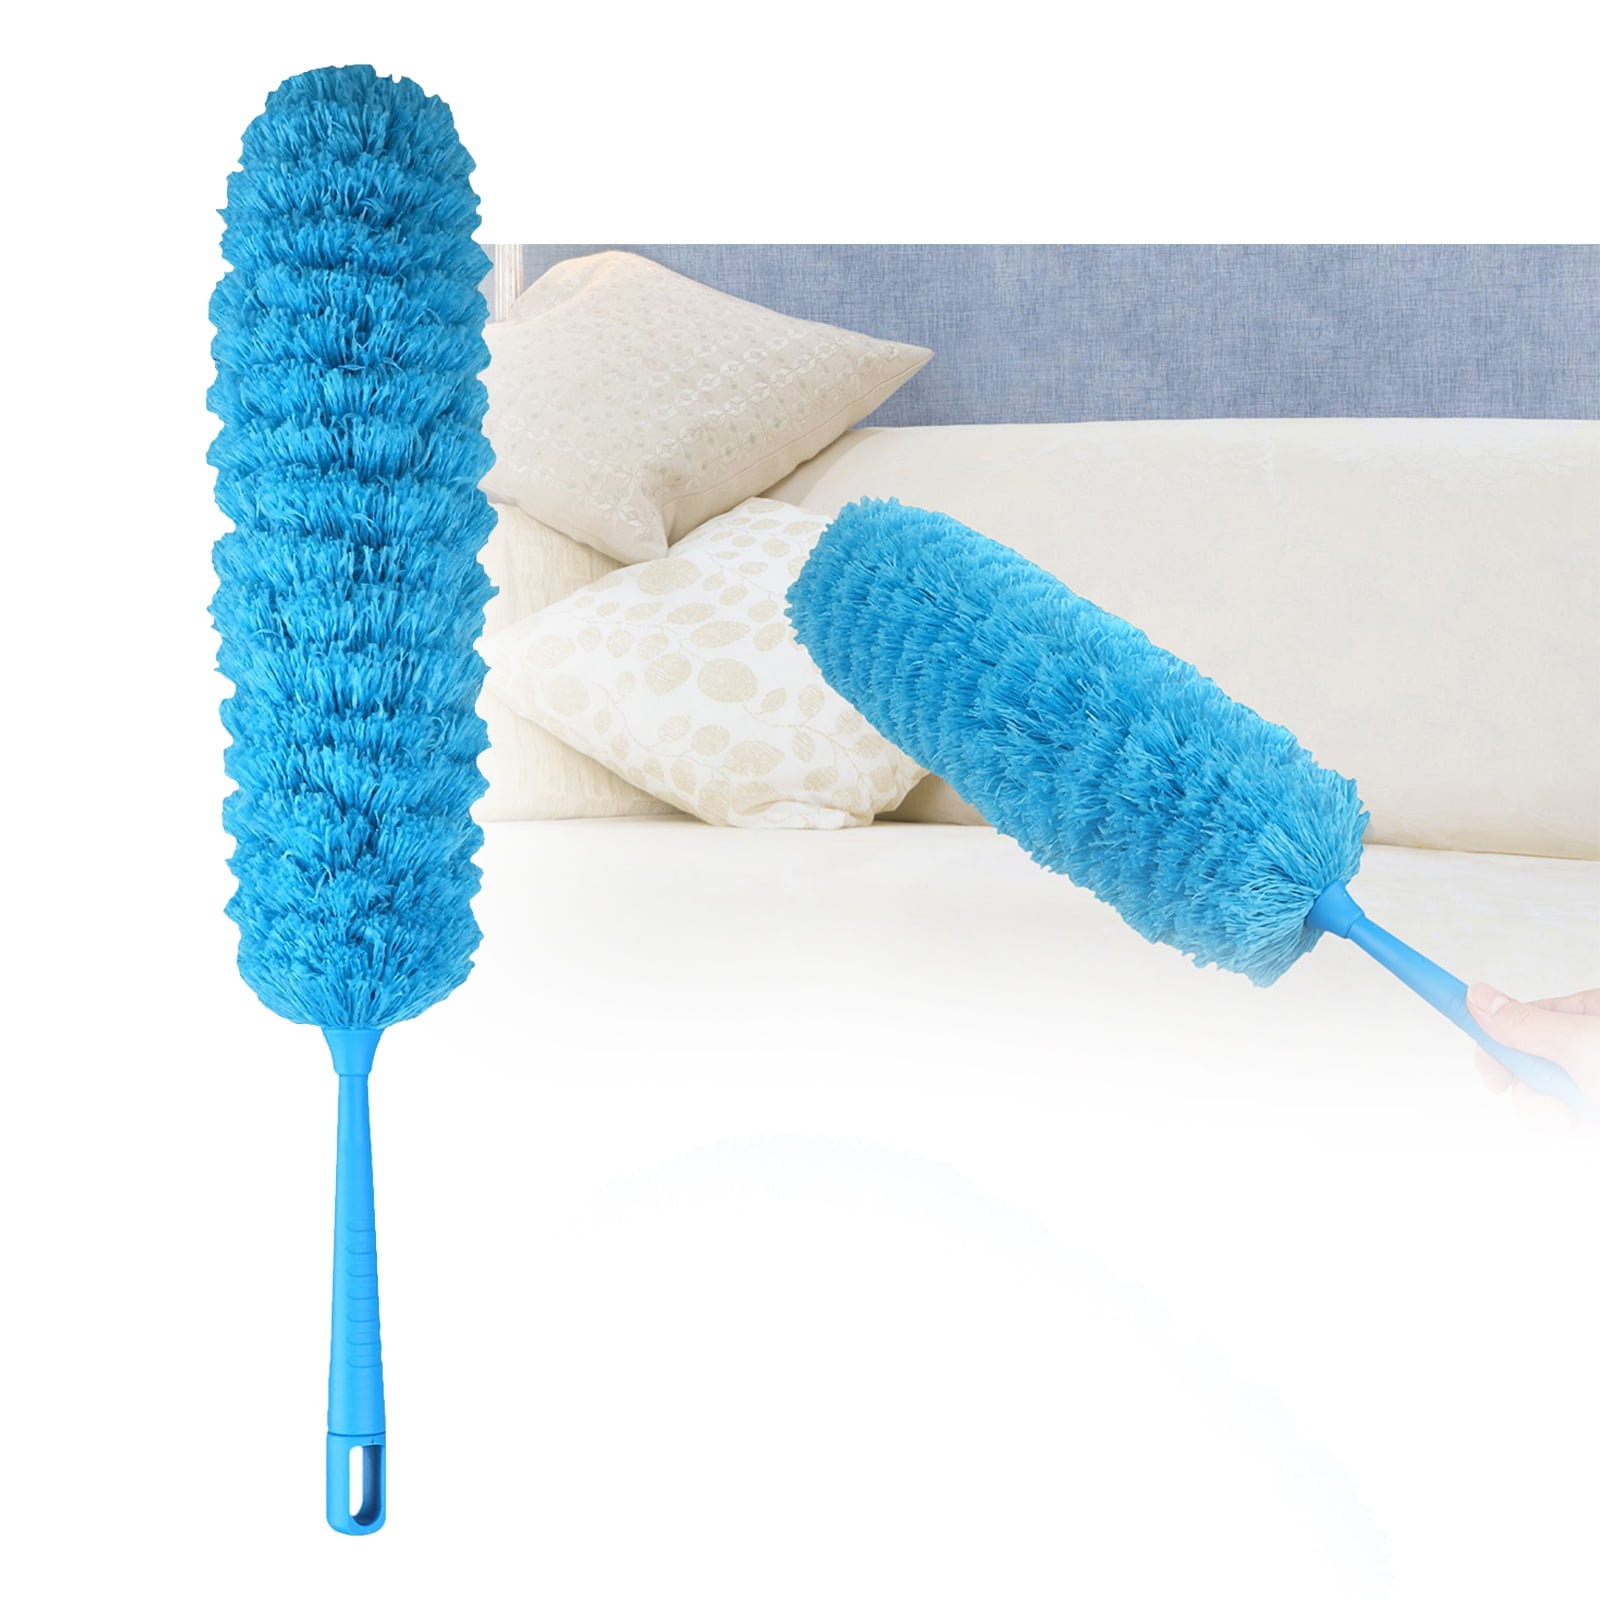 Electrostatic Adsorption Dust Removal Brush Microfiber Feather Duster Electrostatic Dust Duster 2PCS Flexible Bendable Removable Gap Dust Brush for Cleaning 